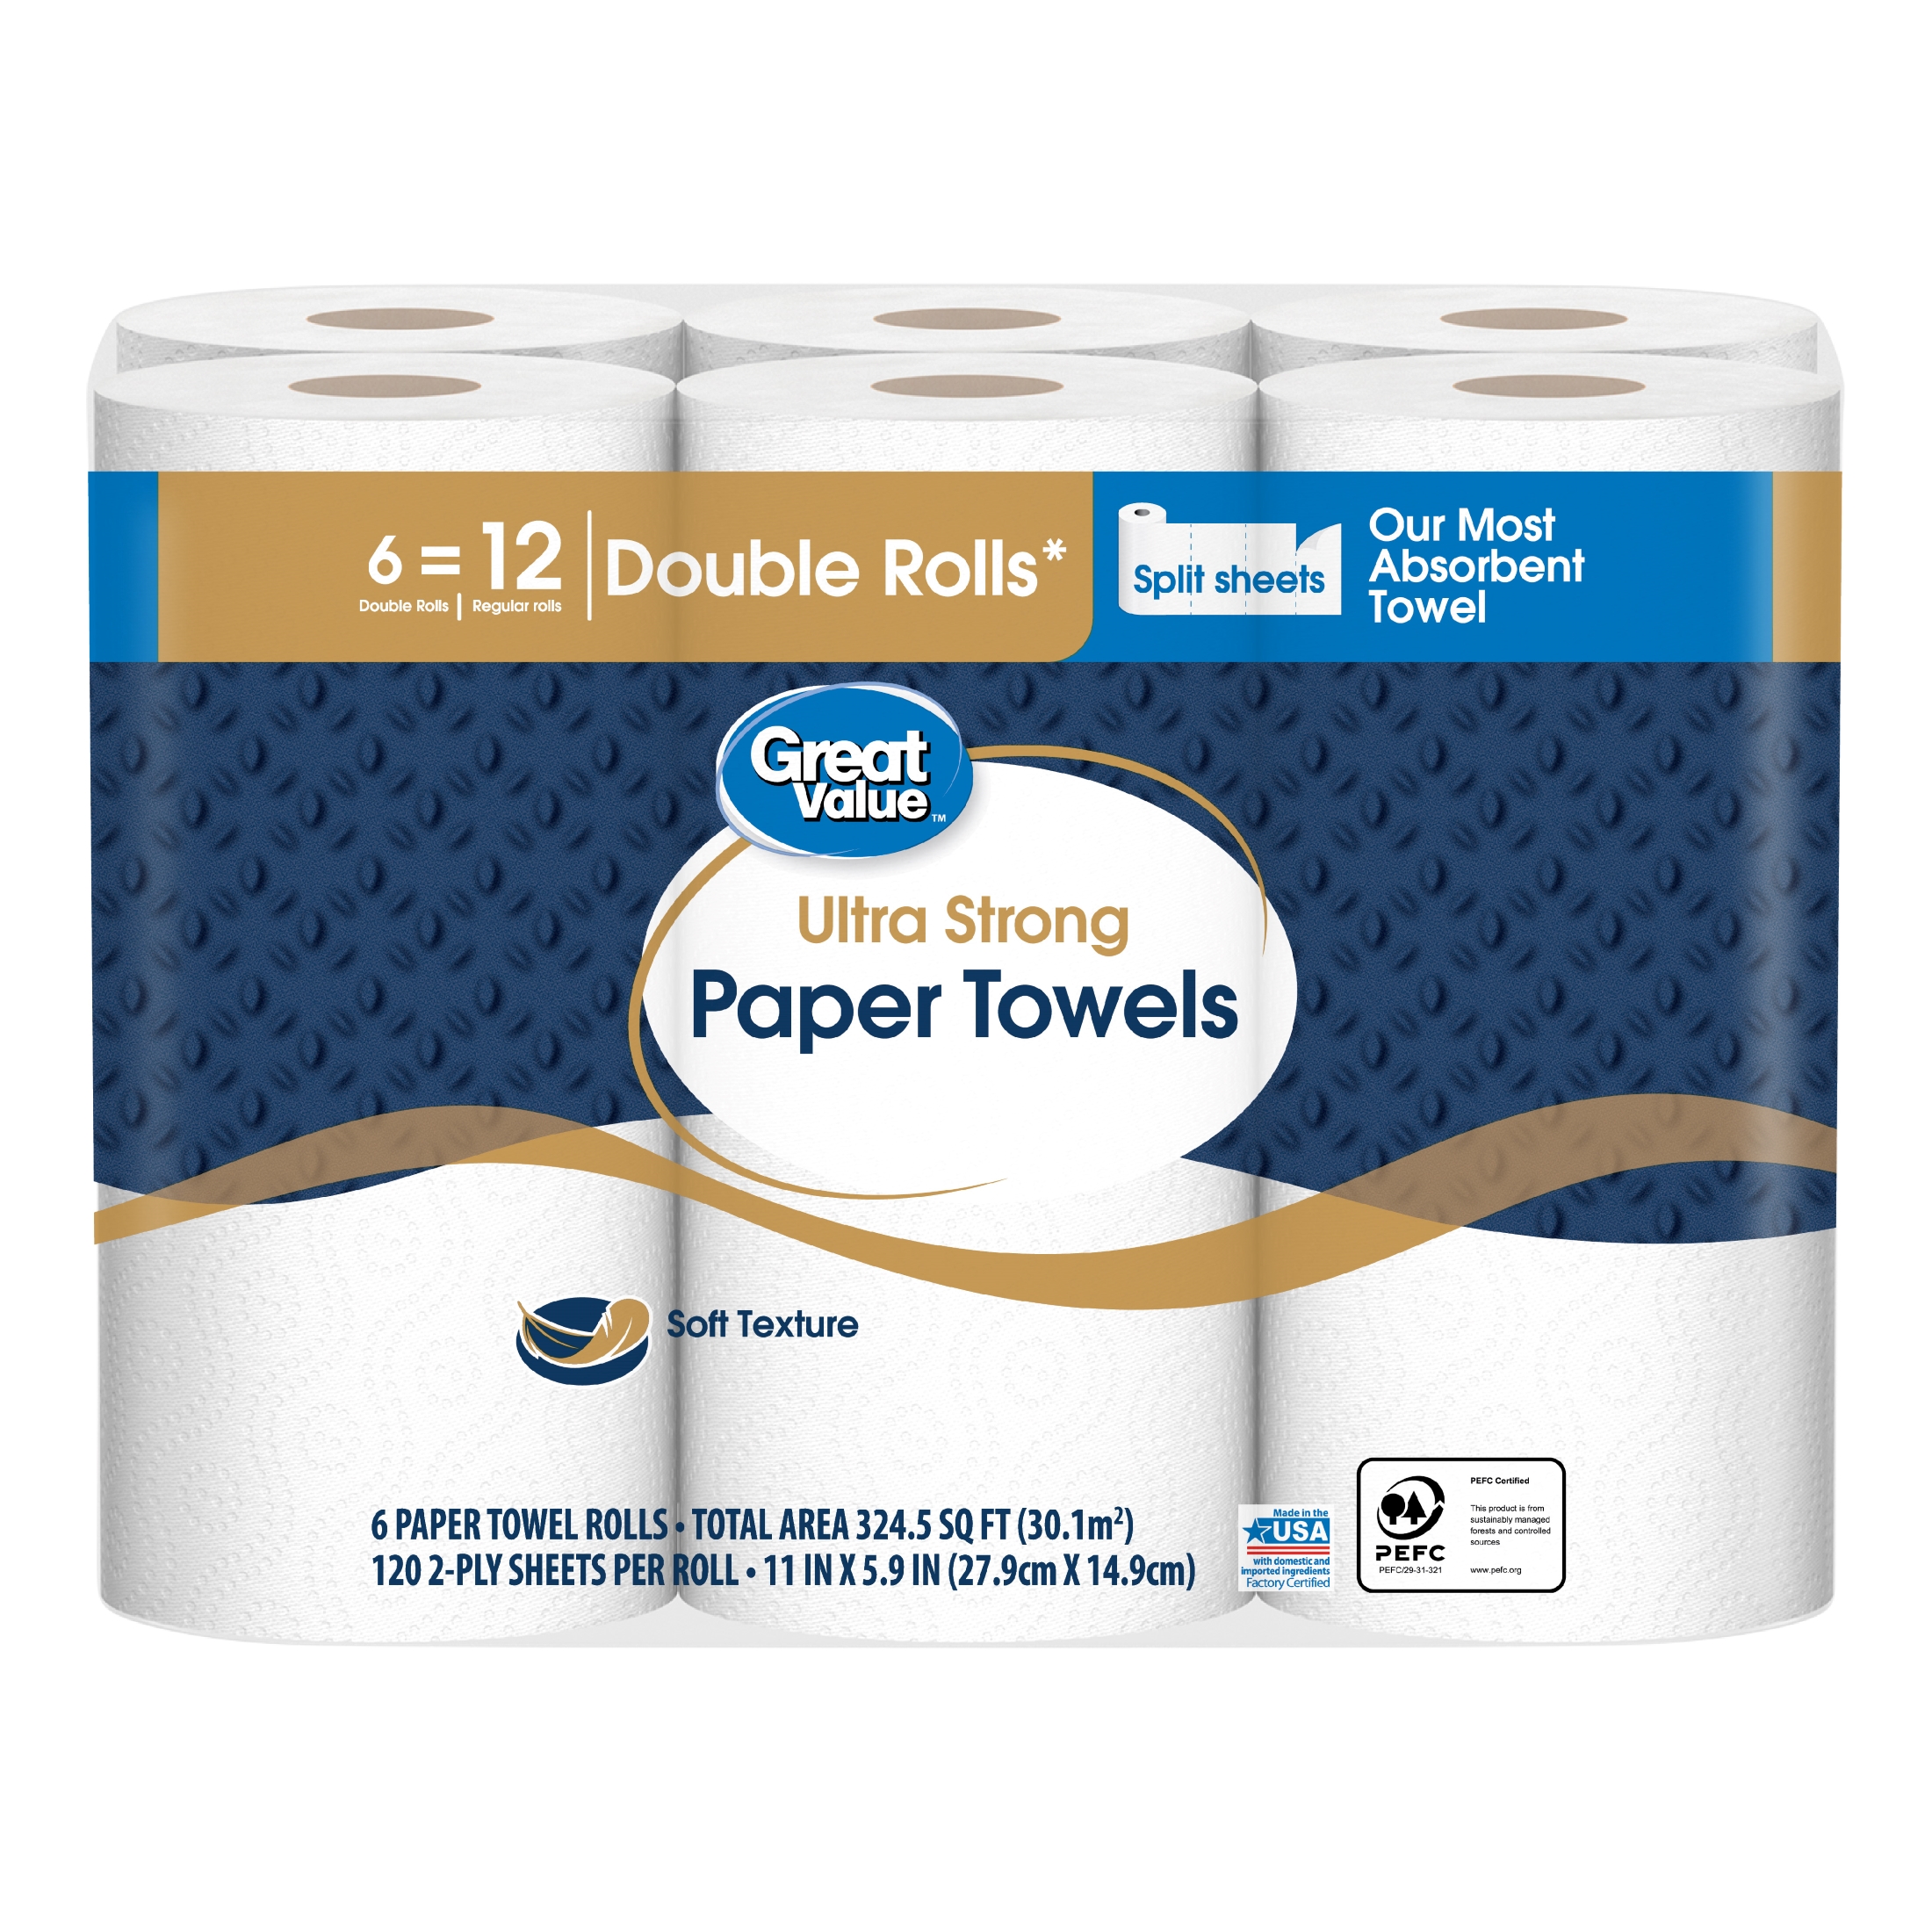 Great Value Ultra Strong Paper Towels, Split Sheets, 6 Double Rolls - image 2 of 9